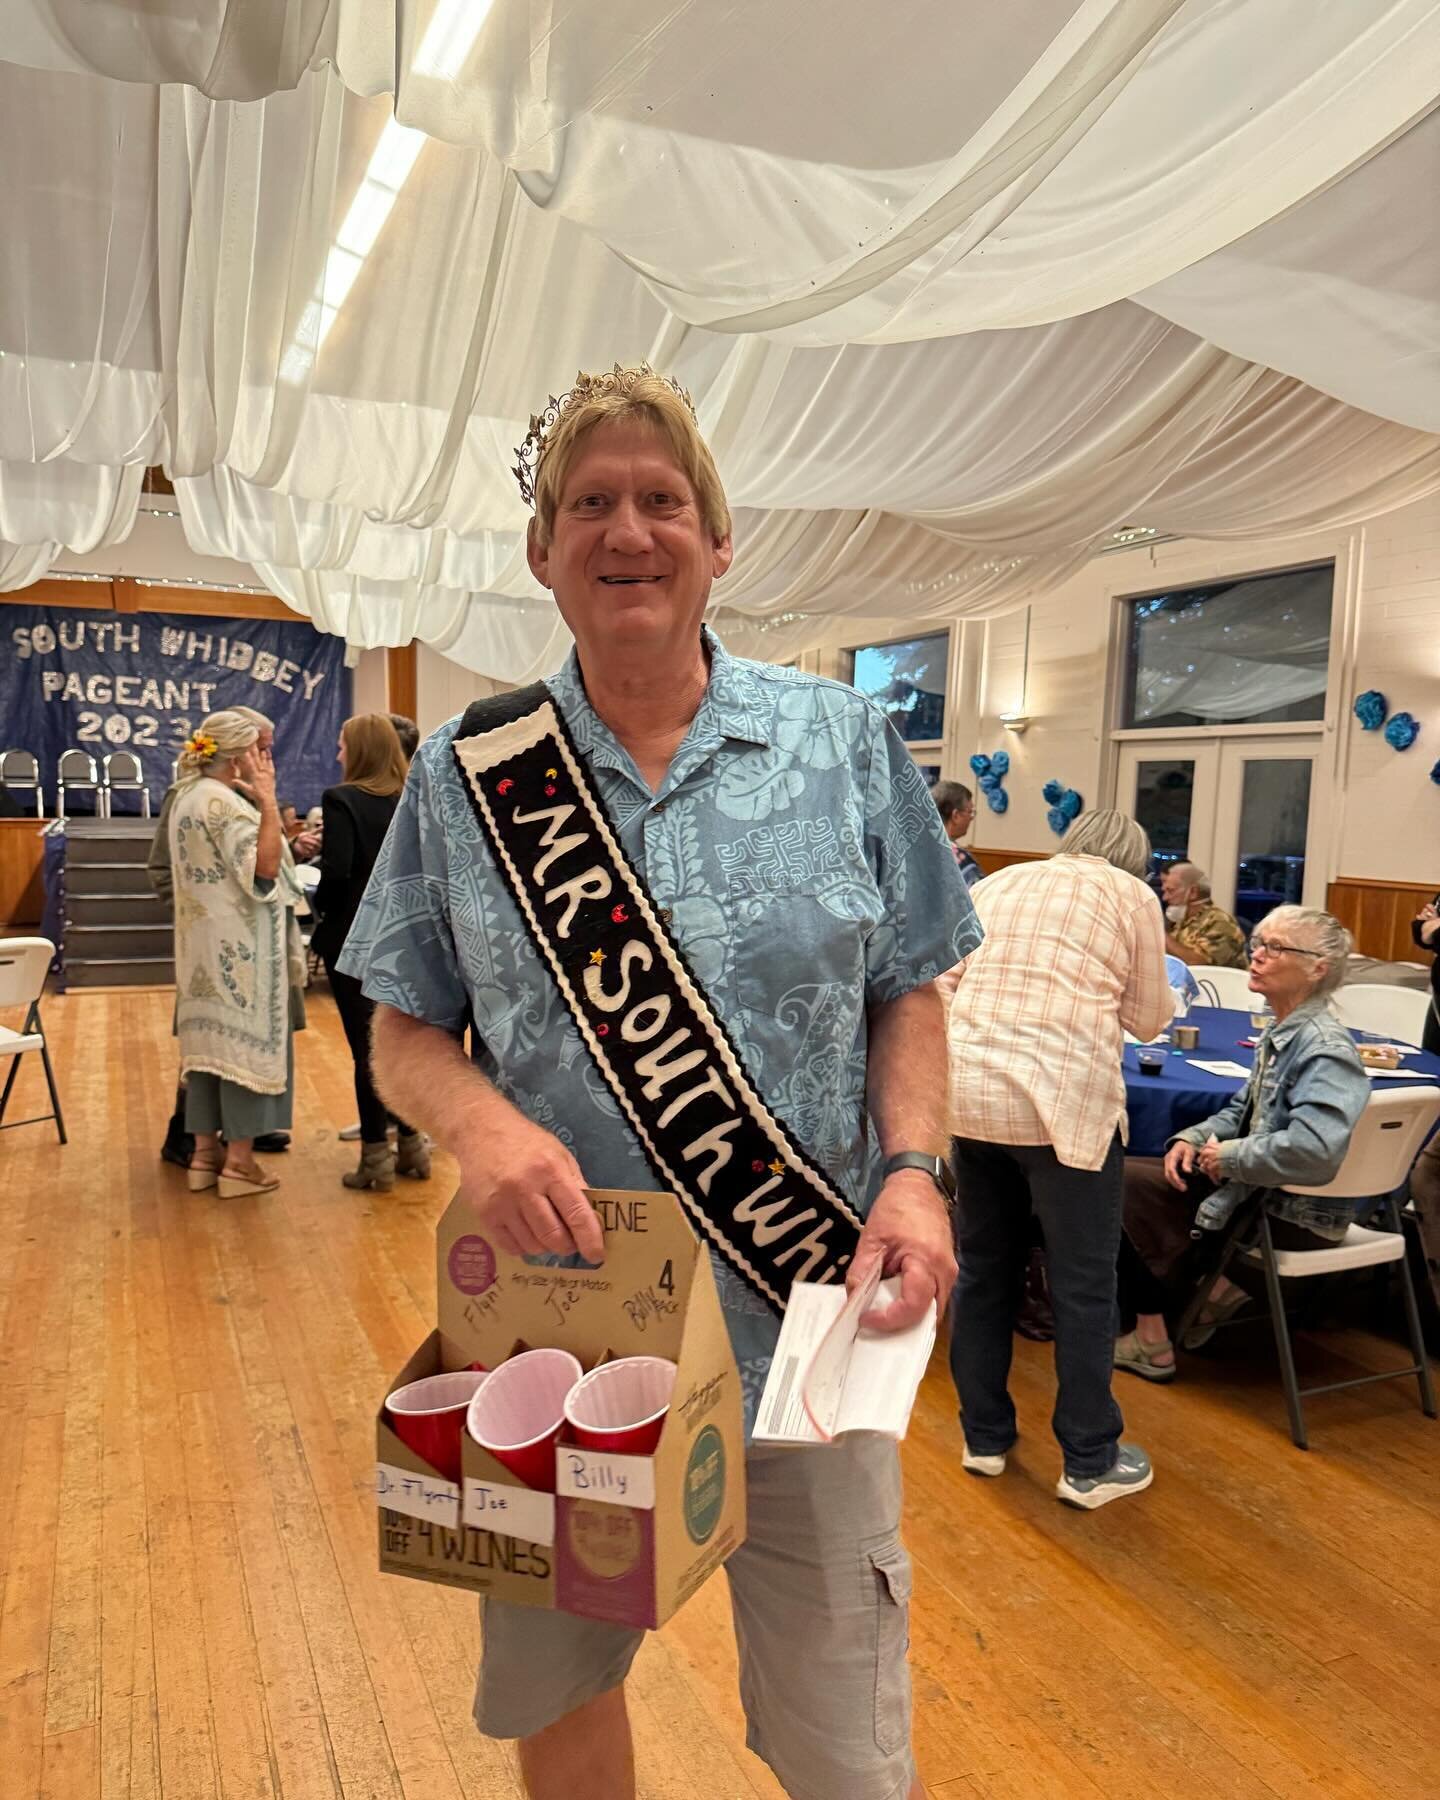 Mr South Whidbey 2022, John LaVassar, is getting ready to crown our next King!